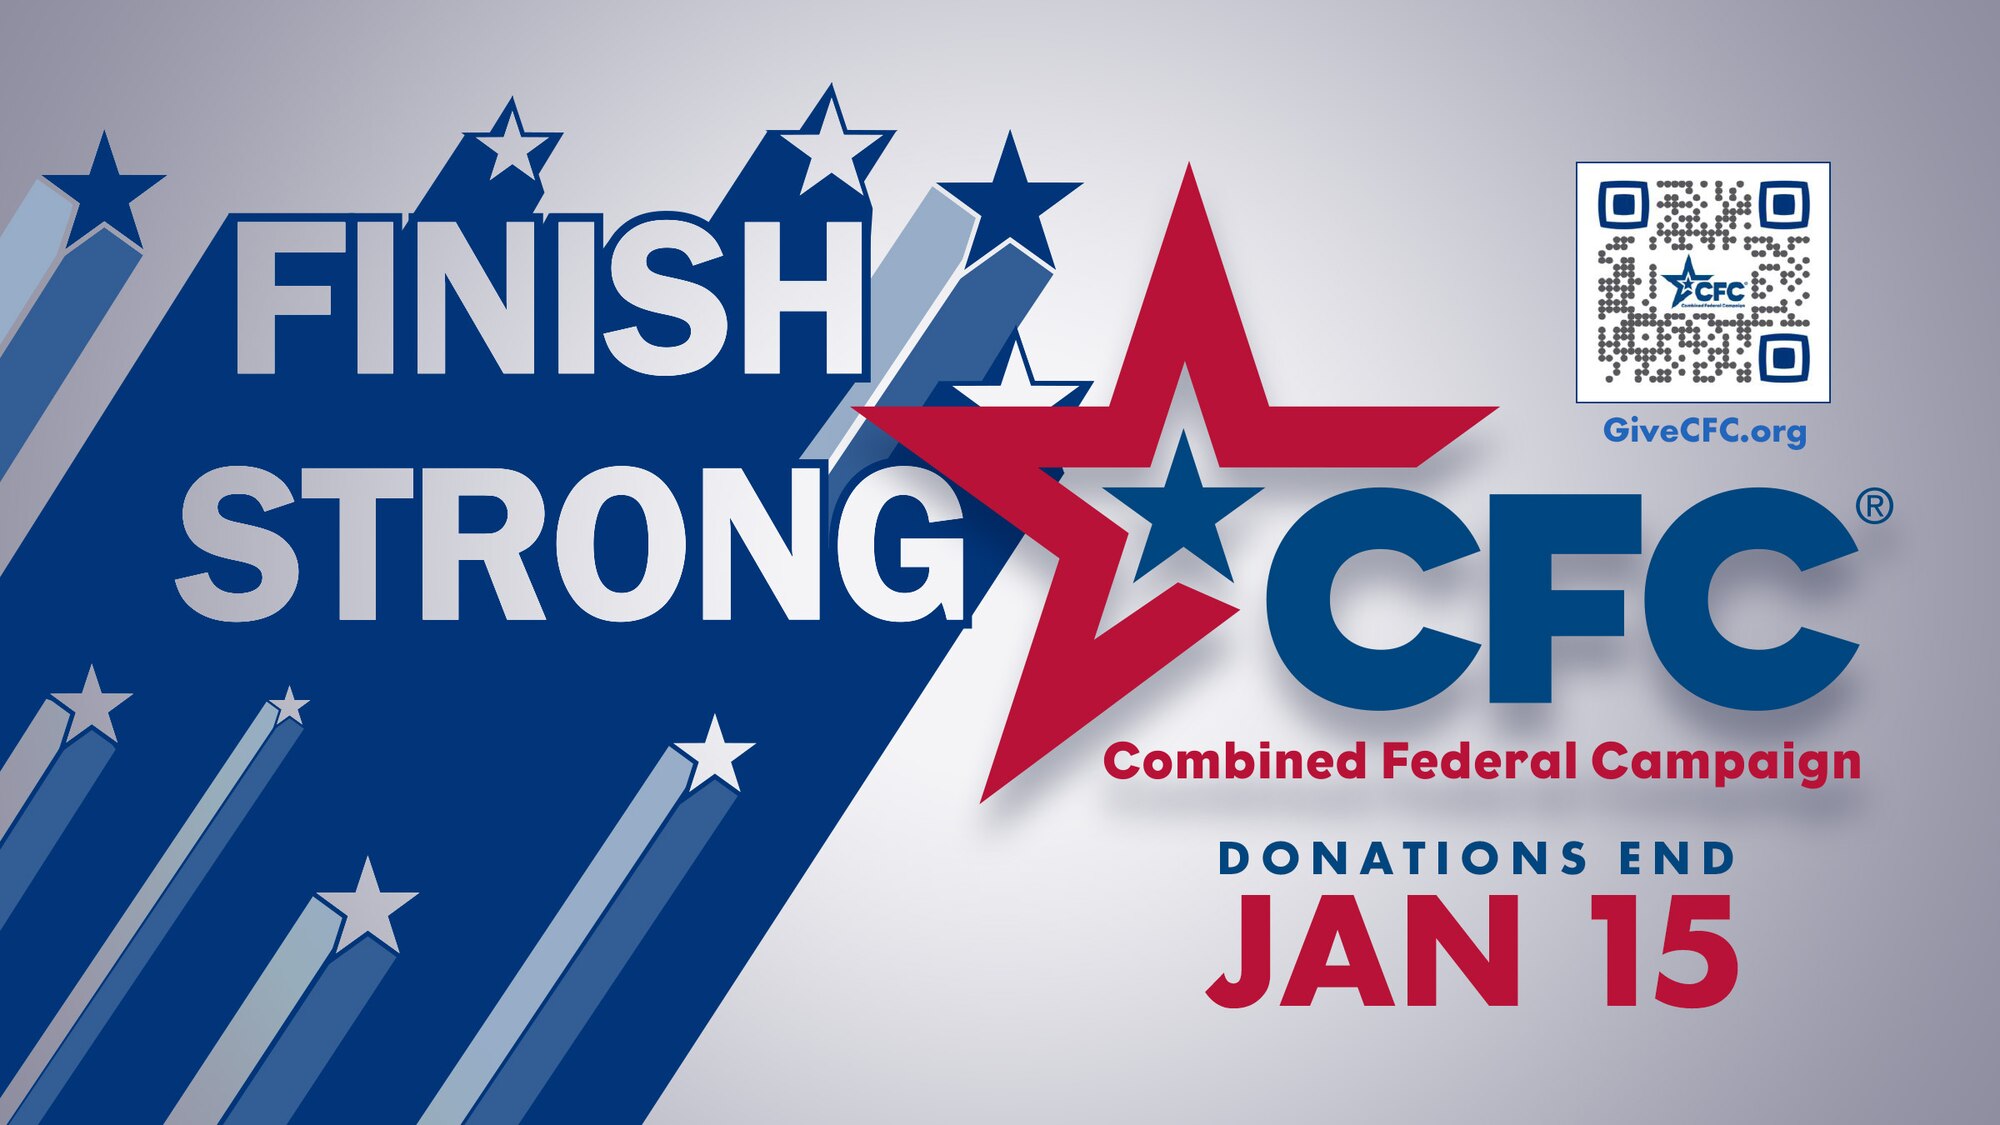 CFC graphic depicting the words "Finish Strong" along with a QR code to the CFC donation site.